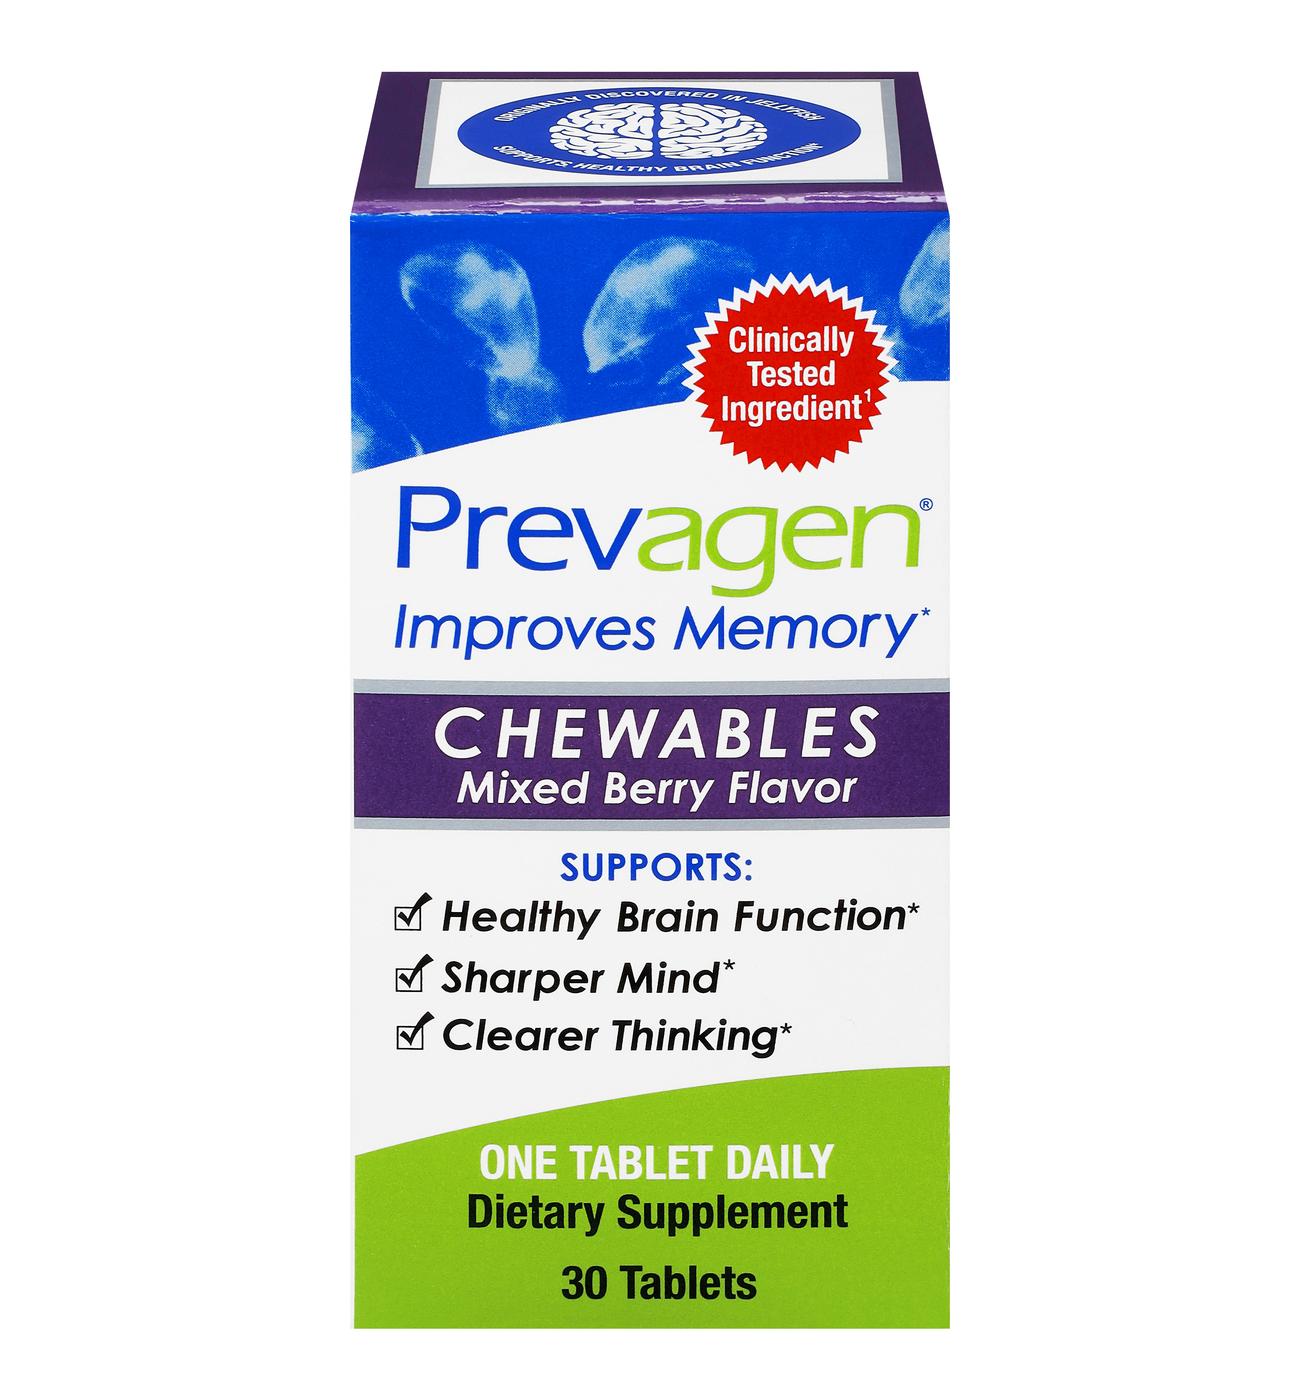 Prevagen Improves Memory Chewable Tablets - Mixed Berry; image 1 of 2